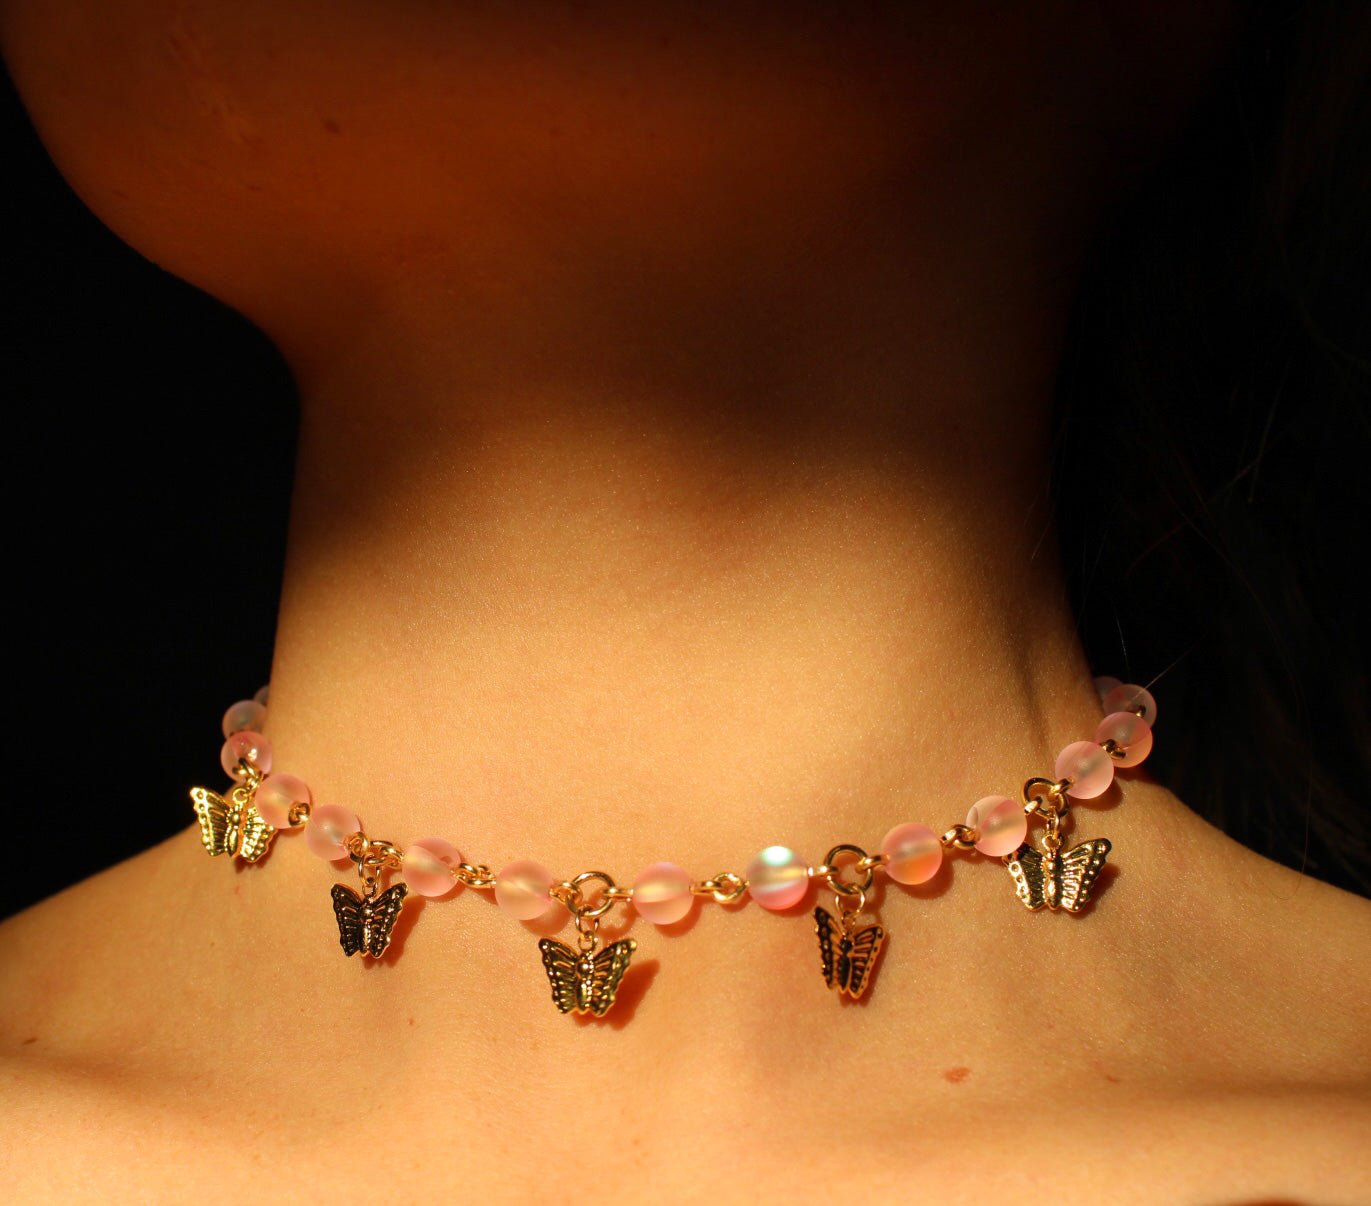 The Mariposa Necklace